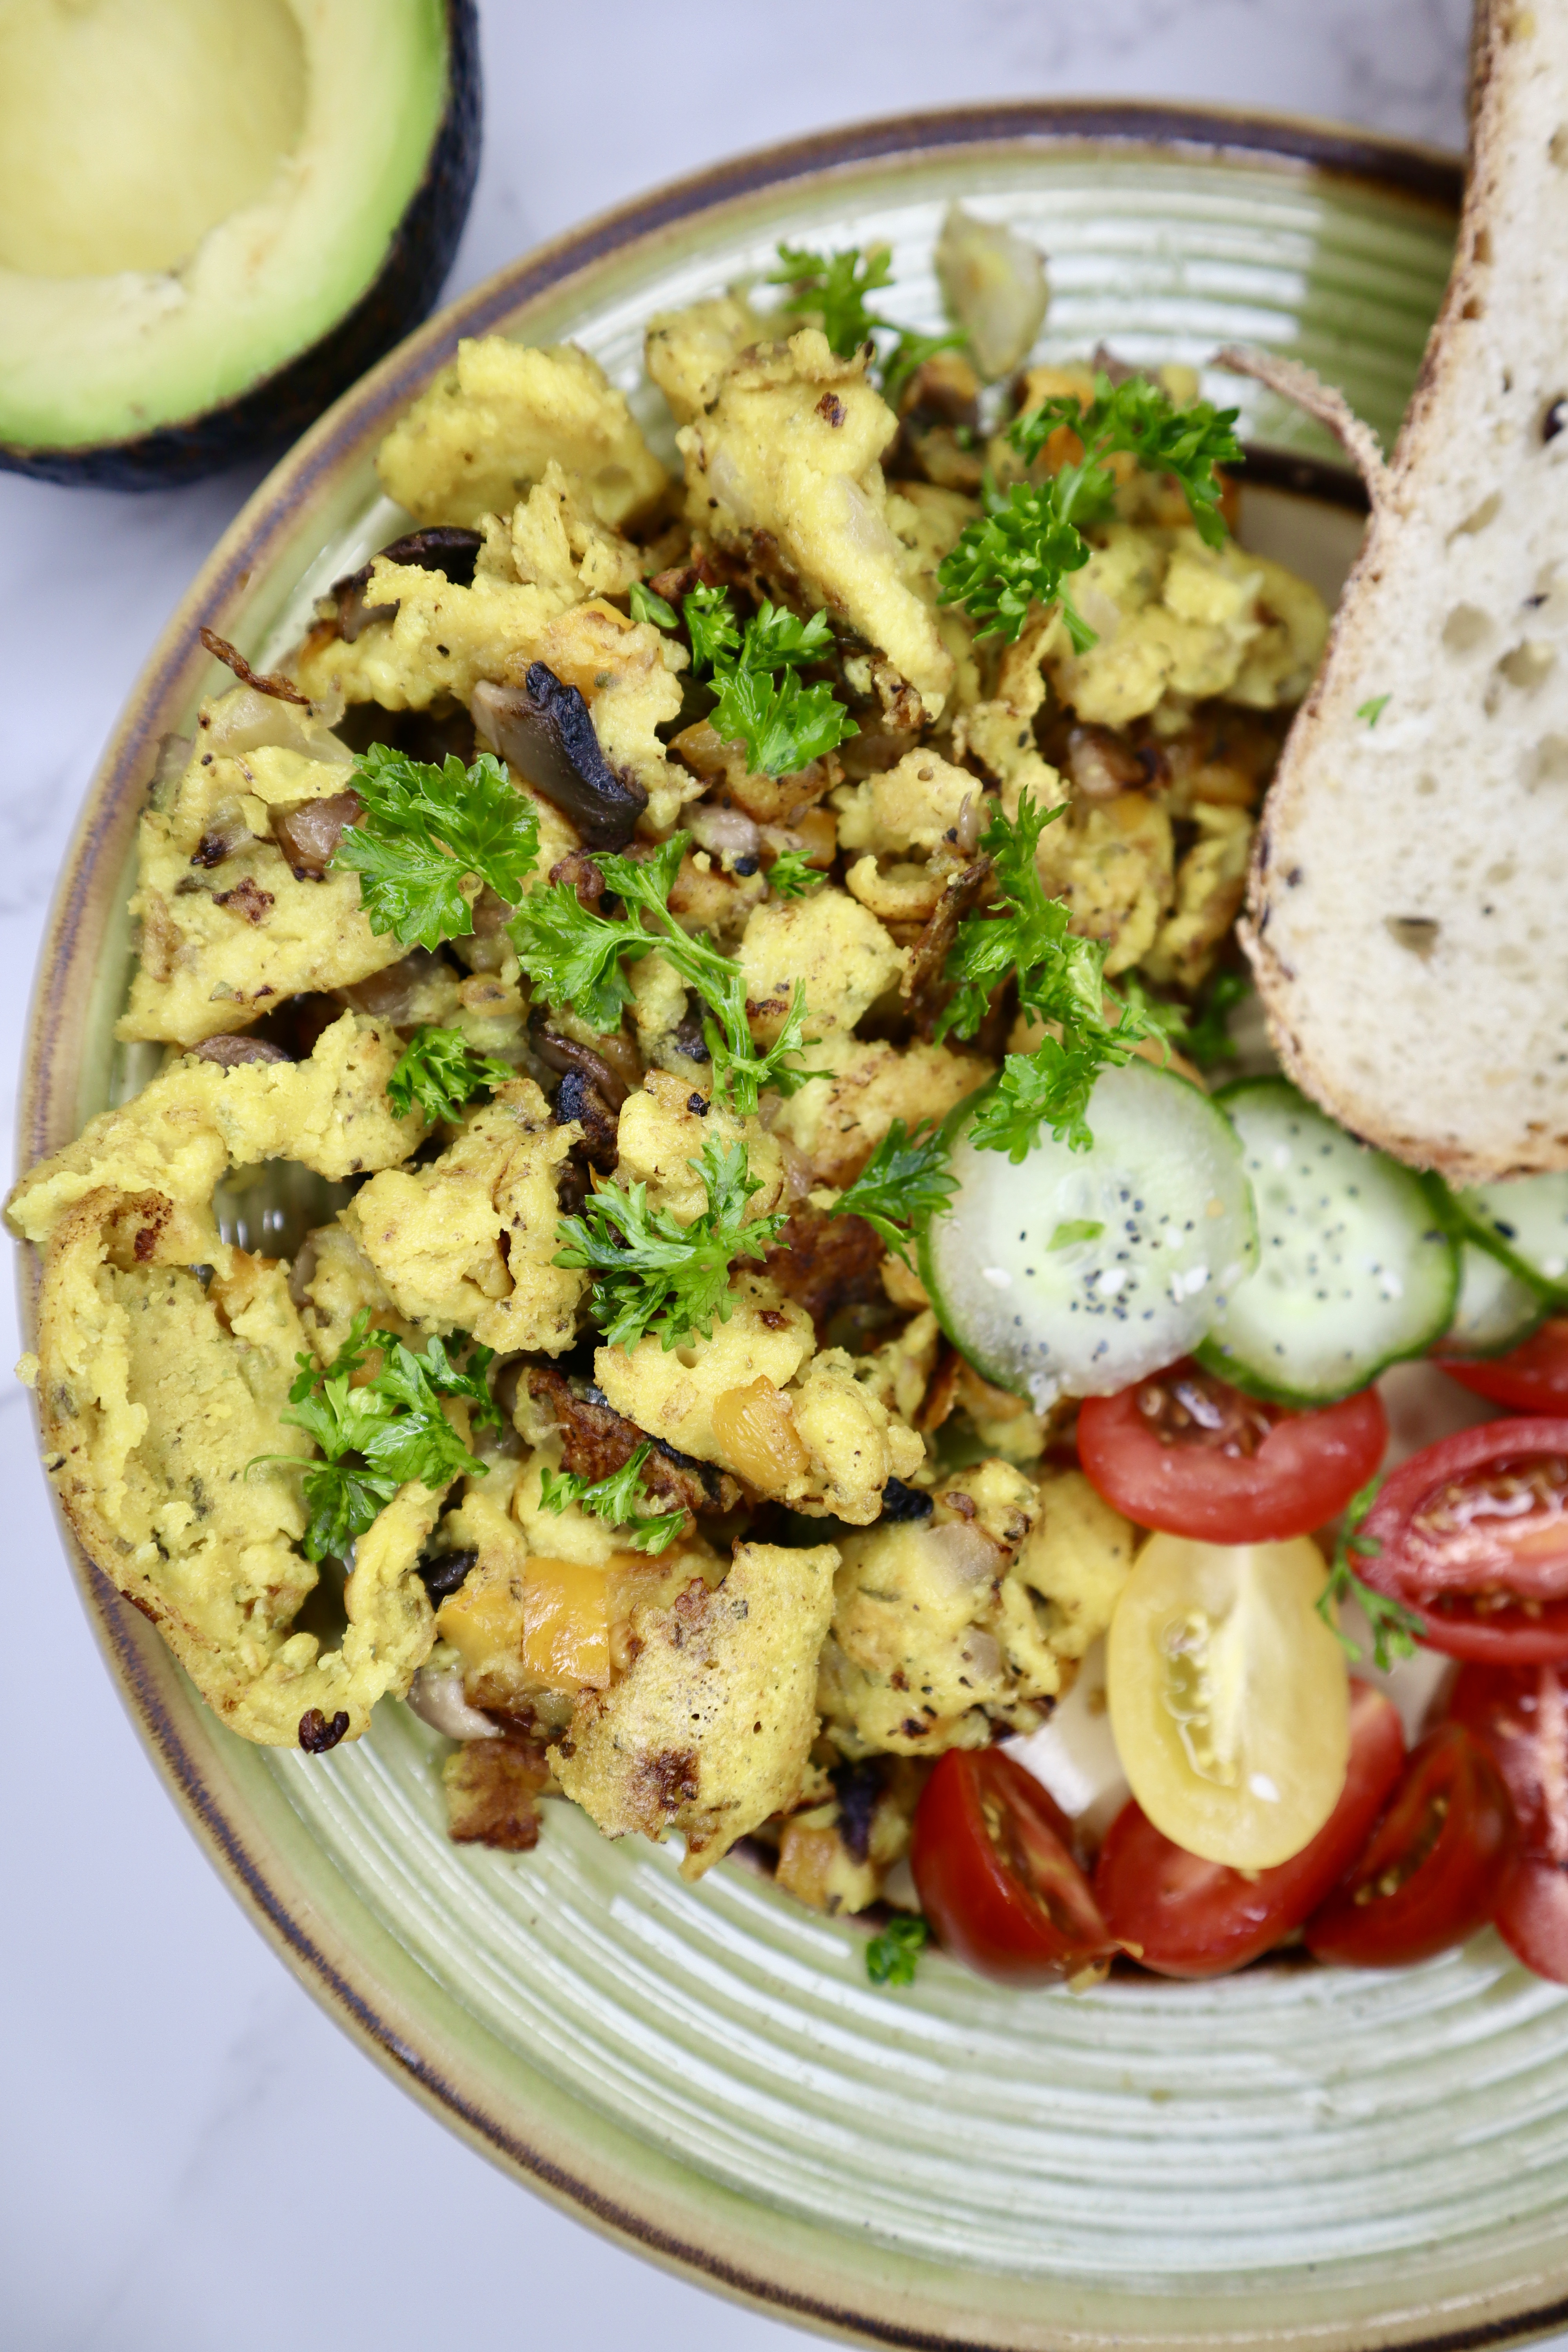 Chickpea flour scramble with bread and tomatoes